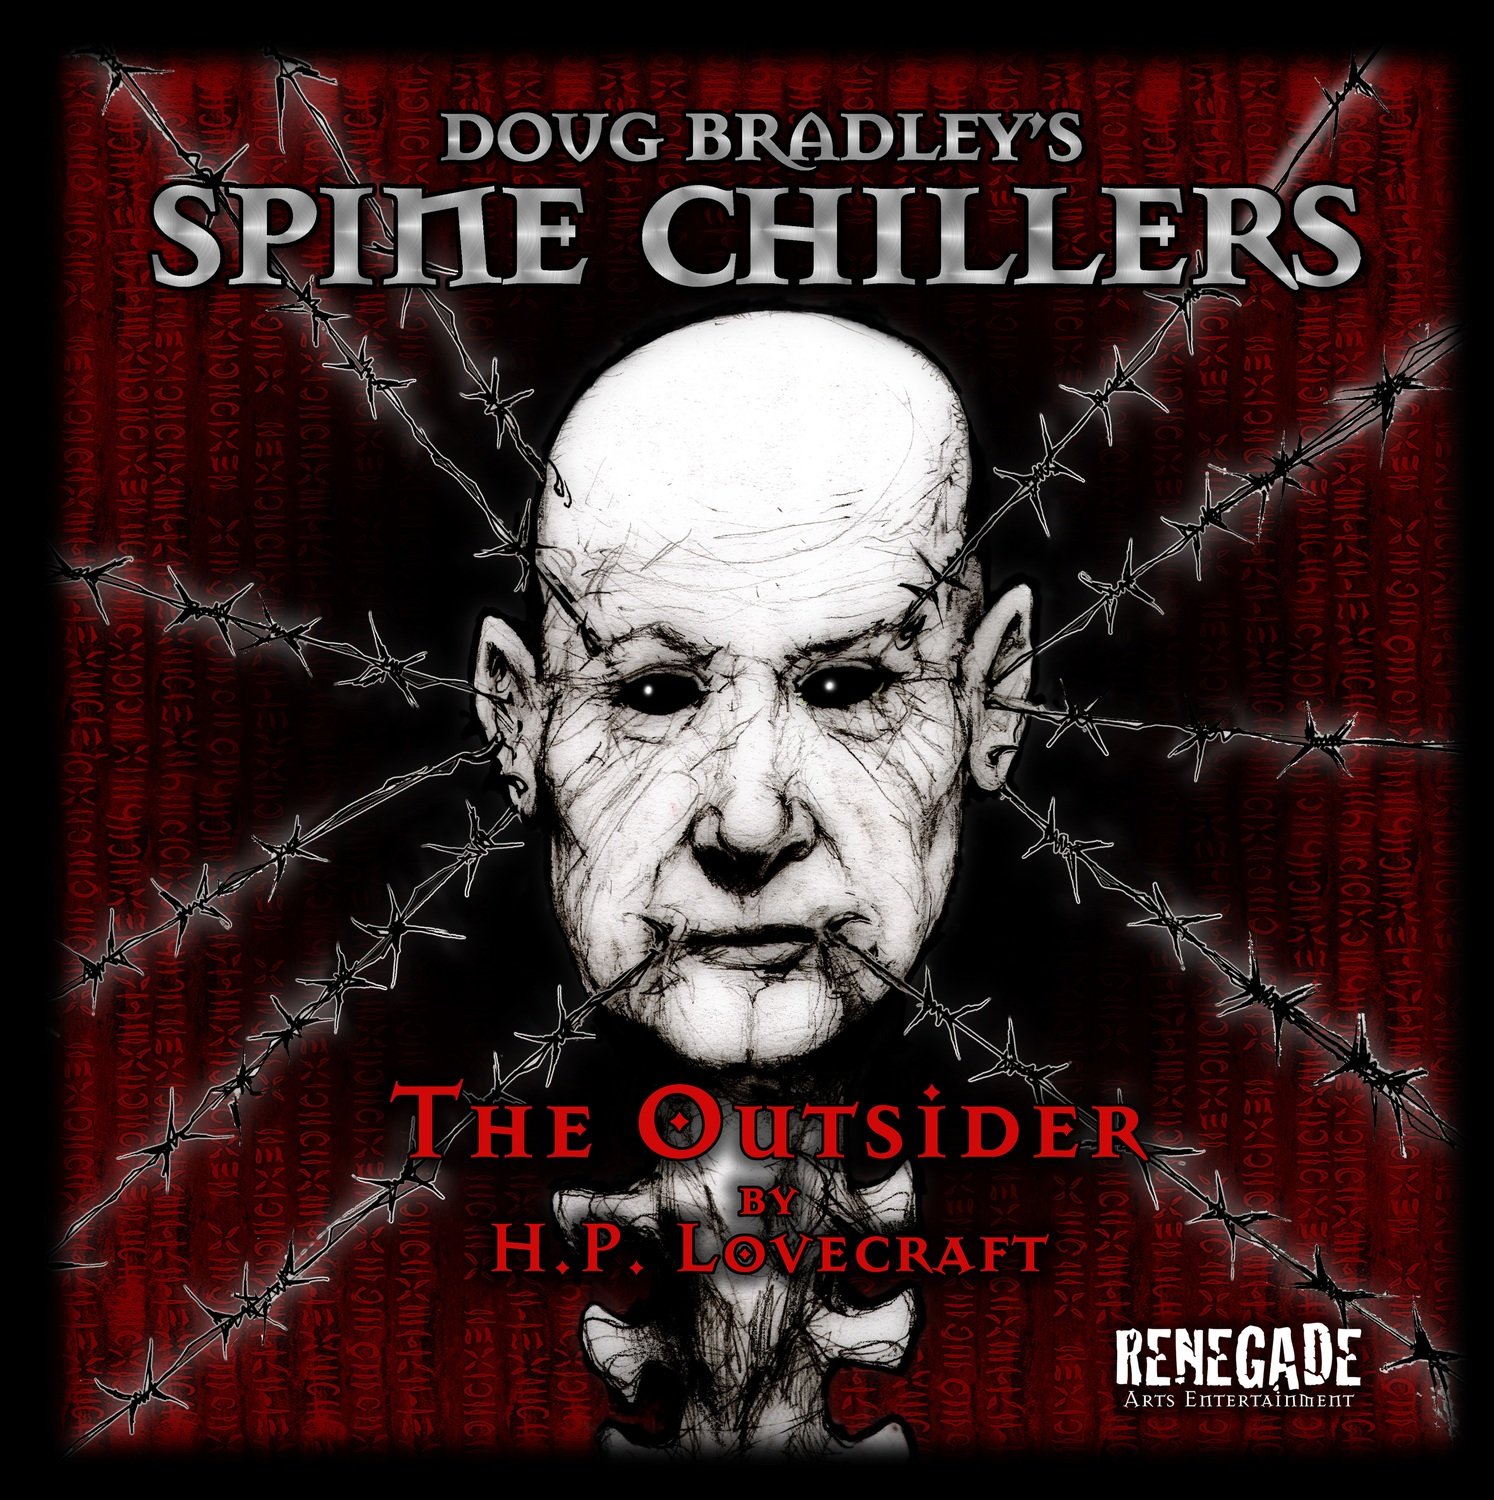 Spinechillers DVD: The Outsider by H. P. Lovecraft